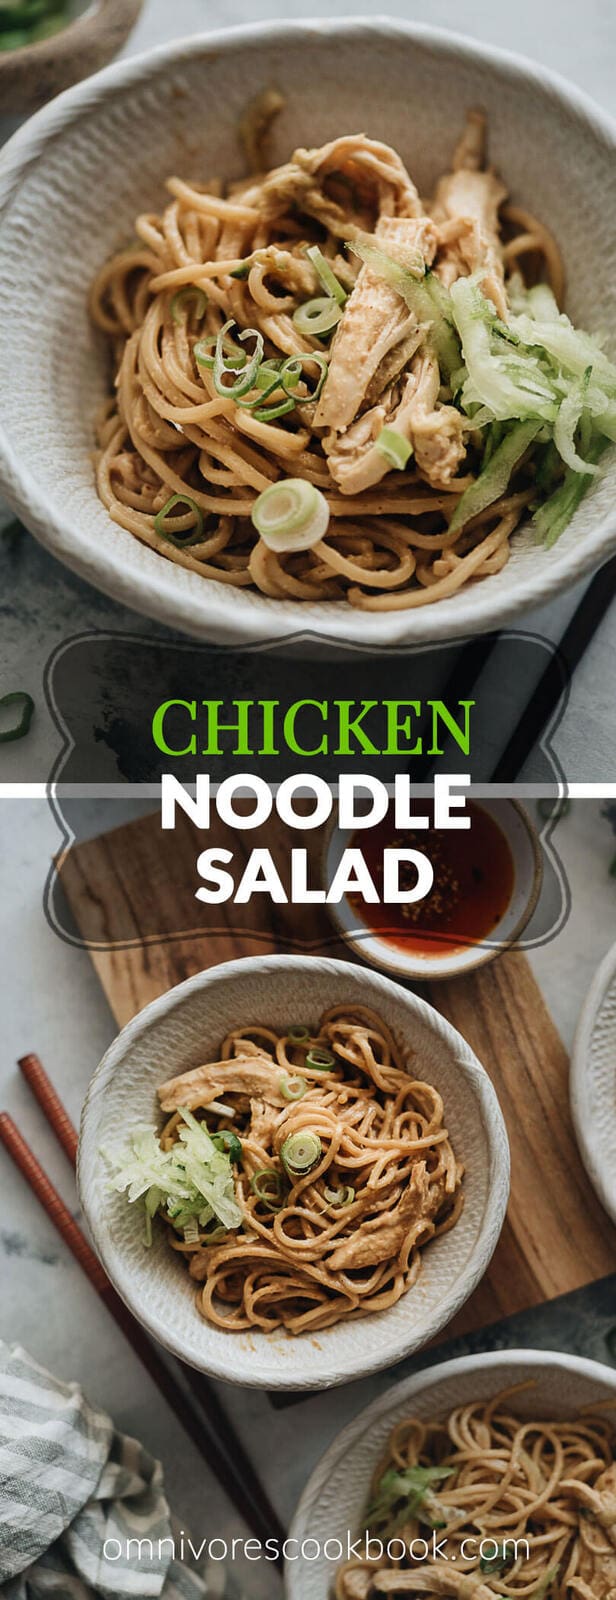 Chinese chicken noodle salad - a perfect summer dish: the noodles and shredded chicken are tossed in a nutty, savory peanut butter based sauce. It’s super easy to prepare and addictively good! {gluten-free adaptable} #asian #healthy #sesame #simple